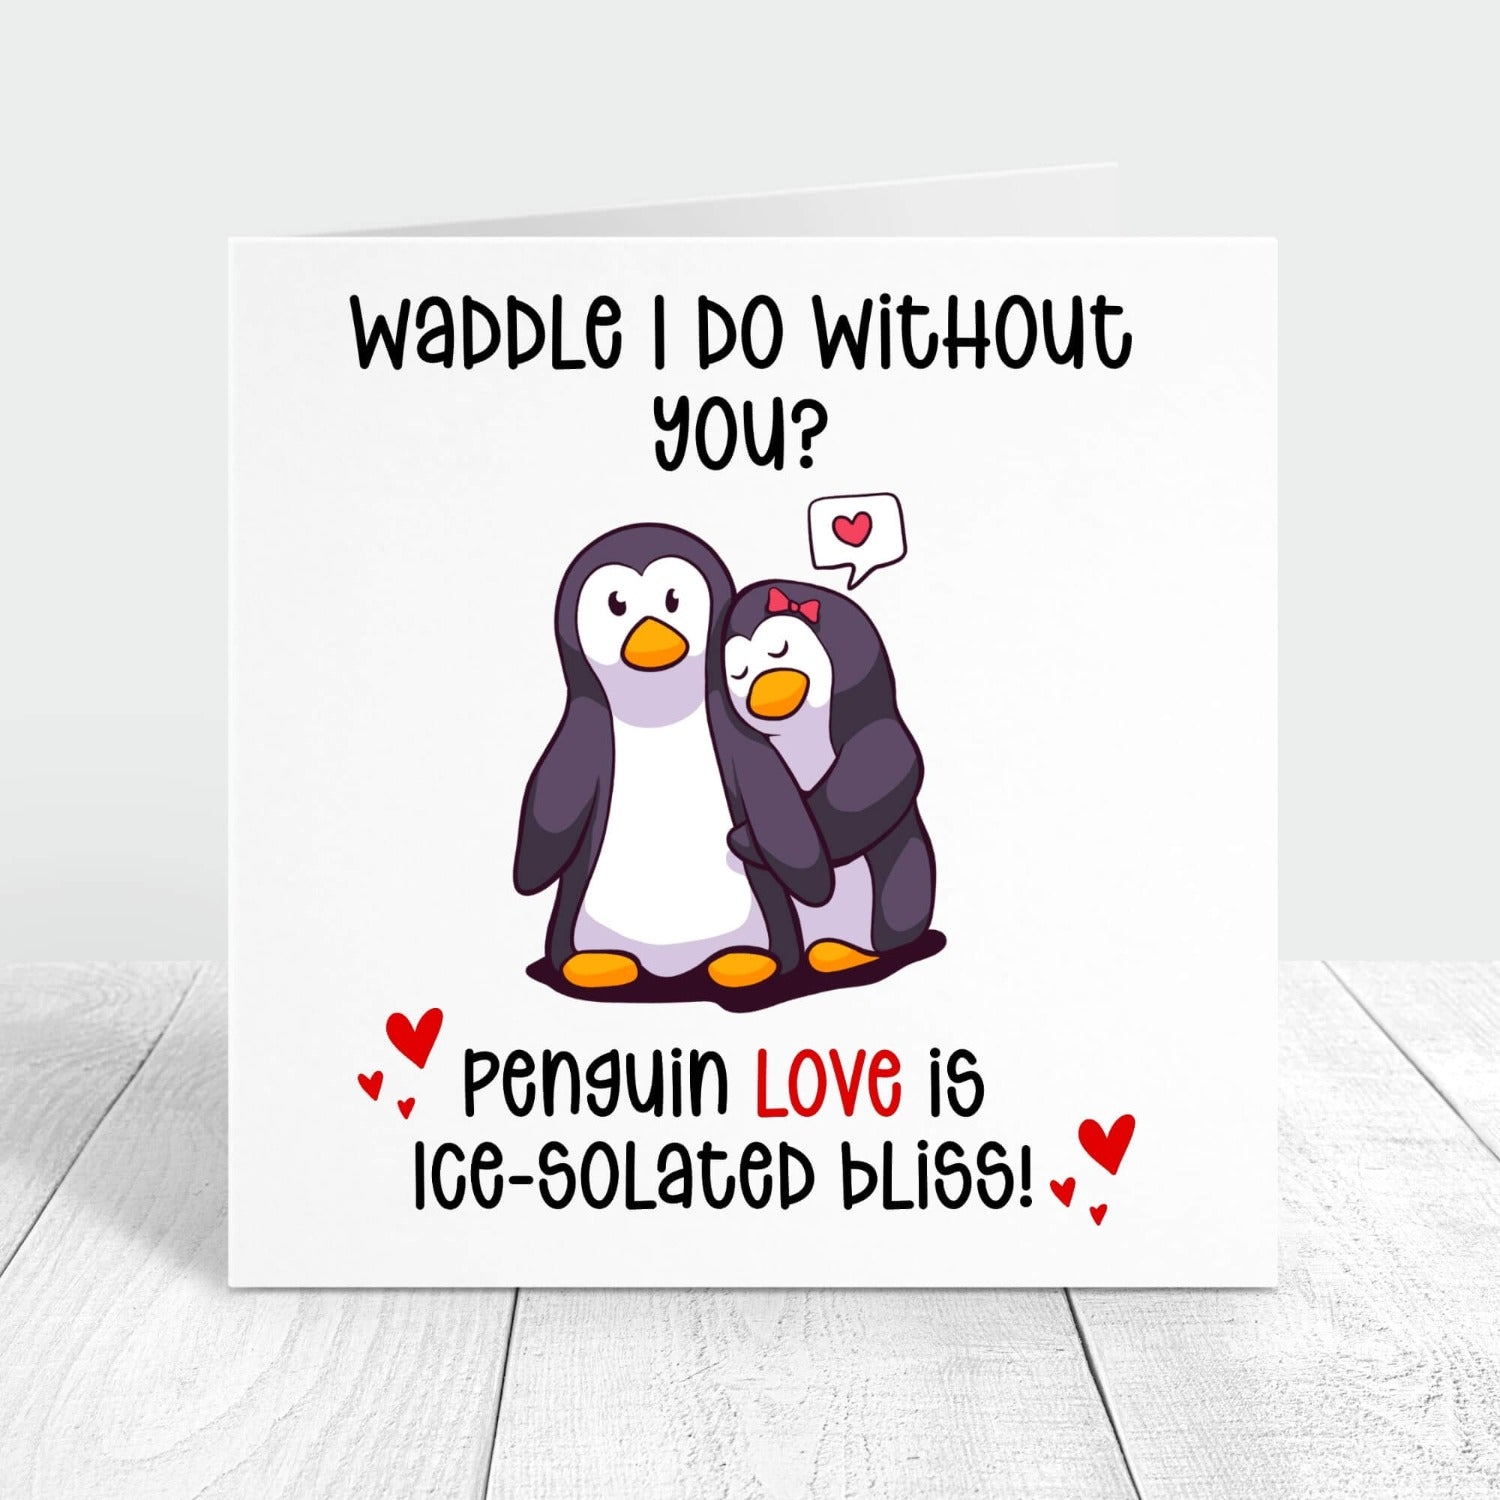 Waddle i do without you personalised love card